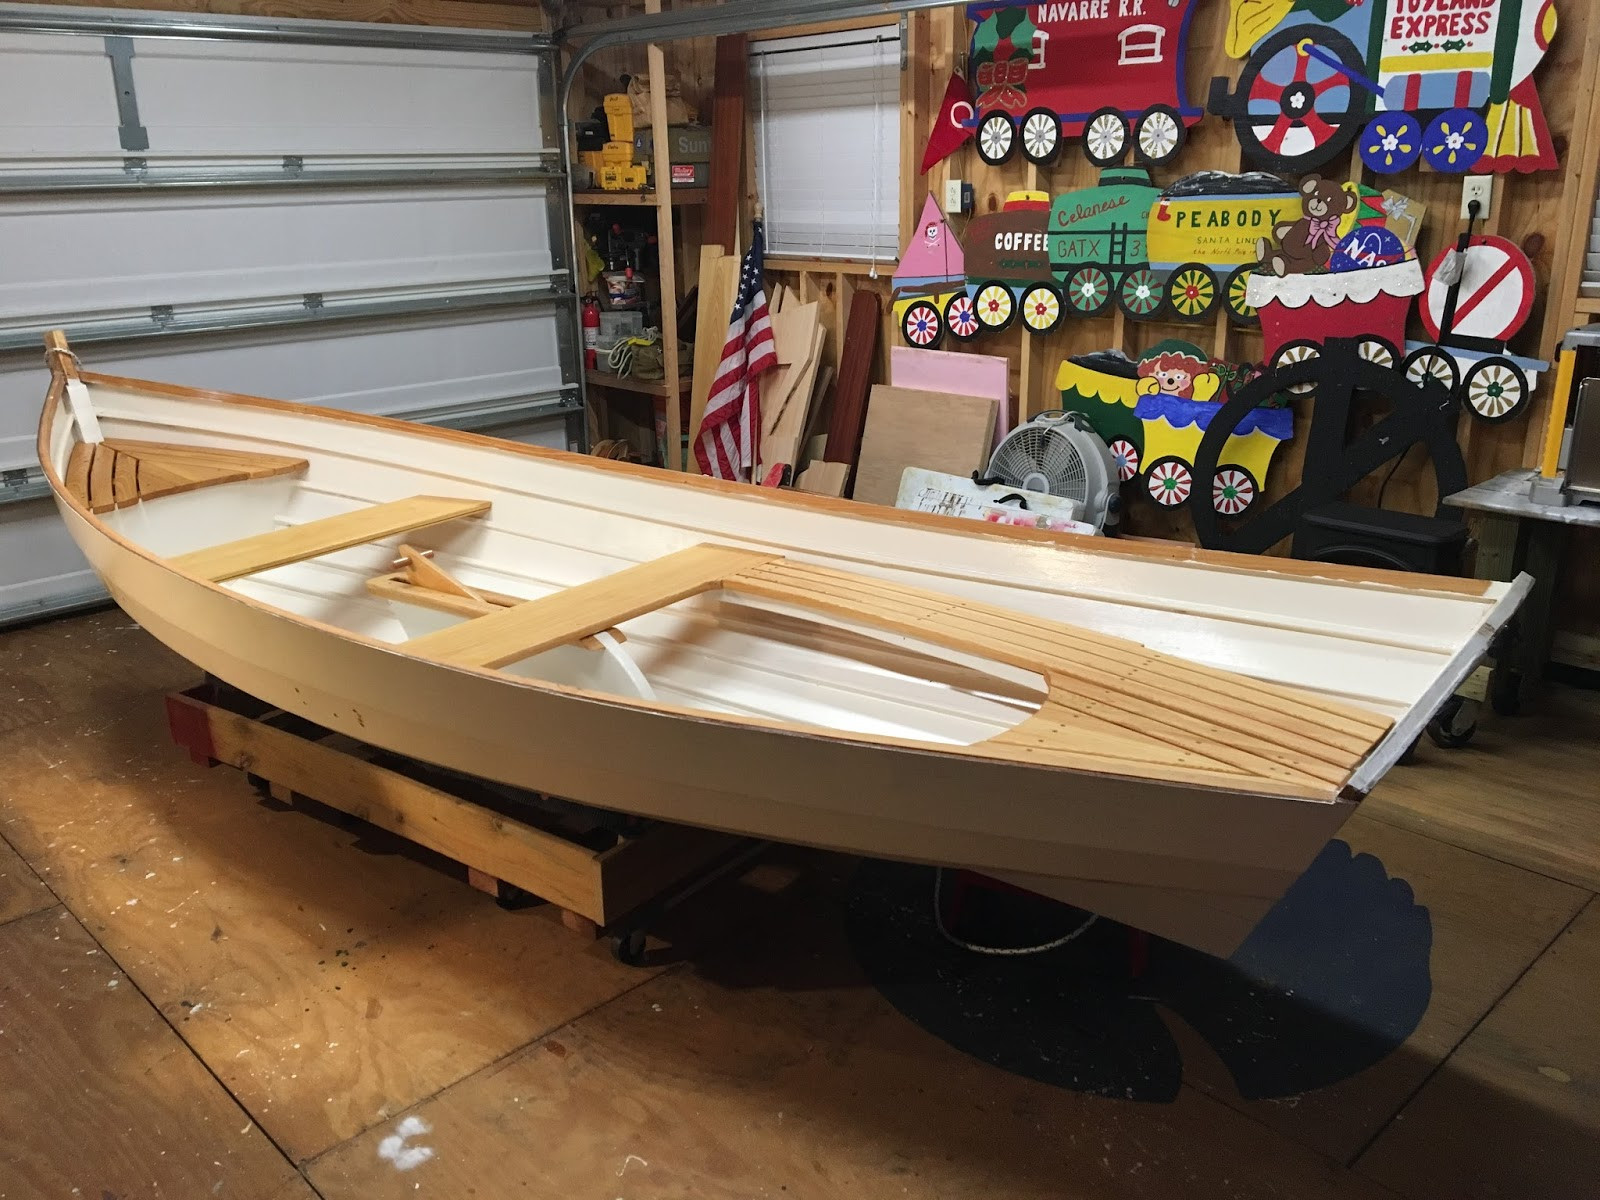 30 Fashionable Hardwood Floor Refinishing northern Kentucky 2024 free download hardwood floor refinishing northern kentucky of ideas on garage setup for boat build for now it is on a cradle with medium size wheels where i can roll it around to the sanding and sawing de